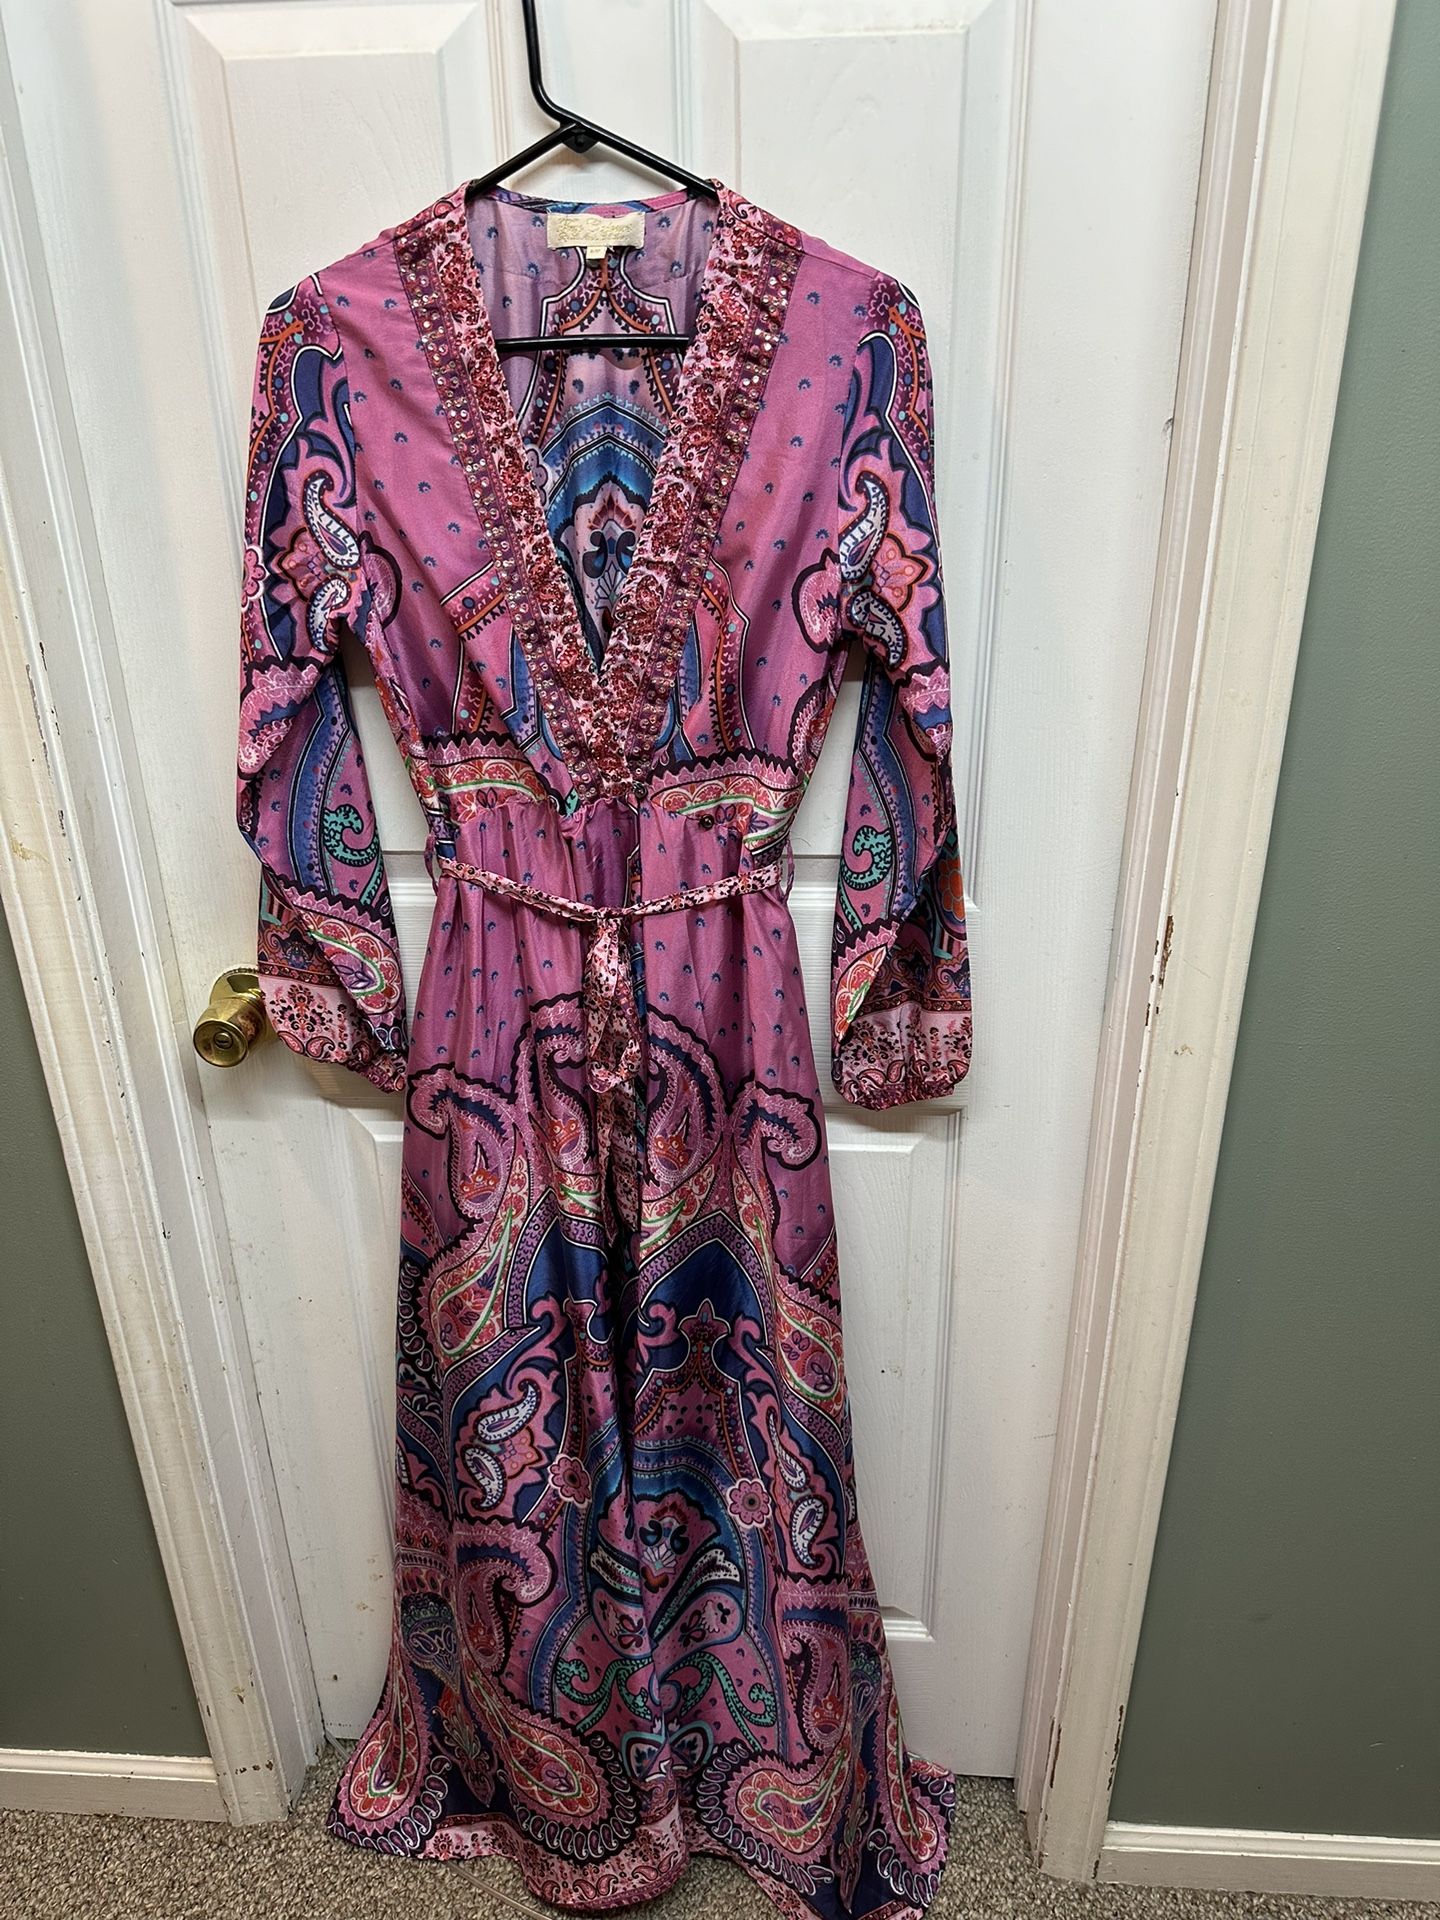 True Colours By La Moda Clothing Beach Cover Up Robe Purple Paisley Size S-M Great Condition 